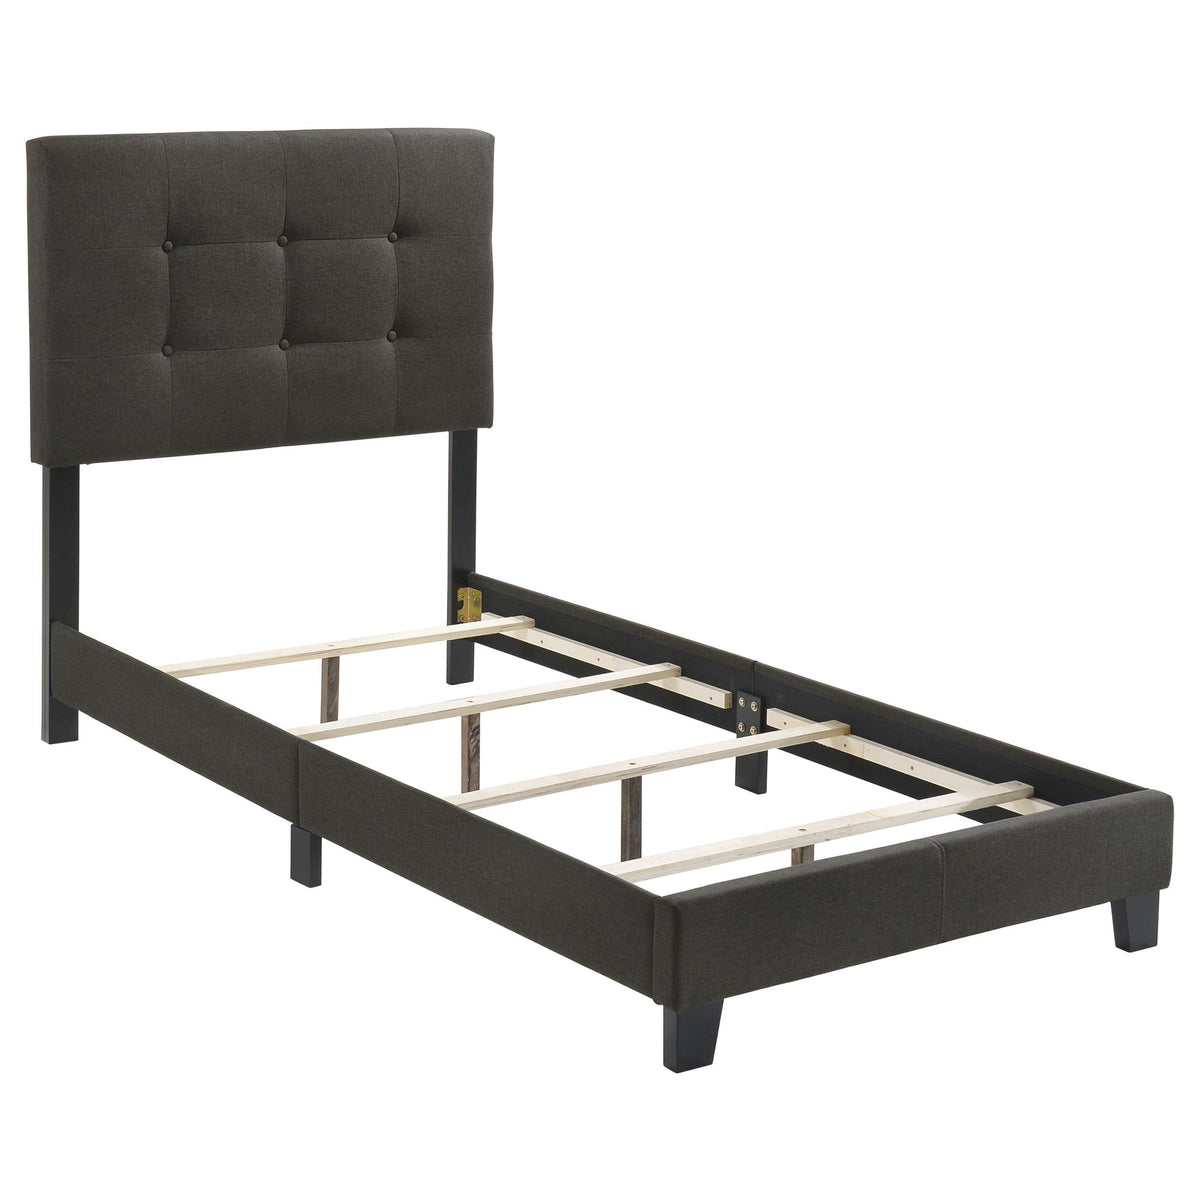 Mapes Tufted Upholstered Twin Bed Charcoal Mapes Tufted Upholstered Twin Bed Charcoal Half Price Furniture